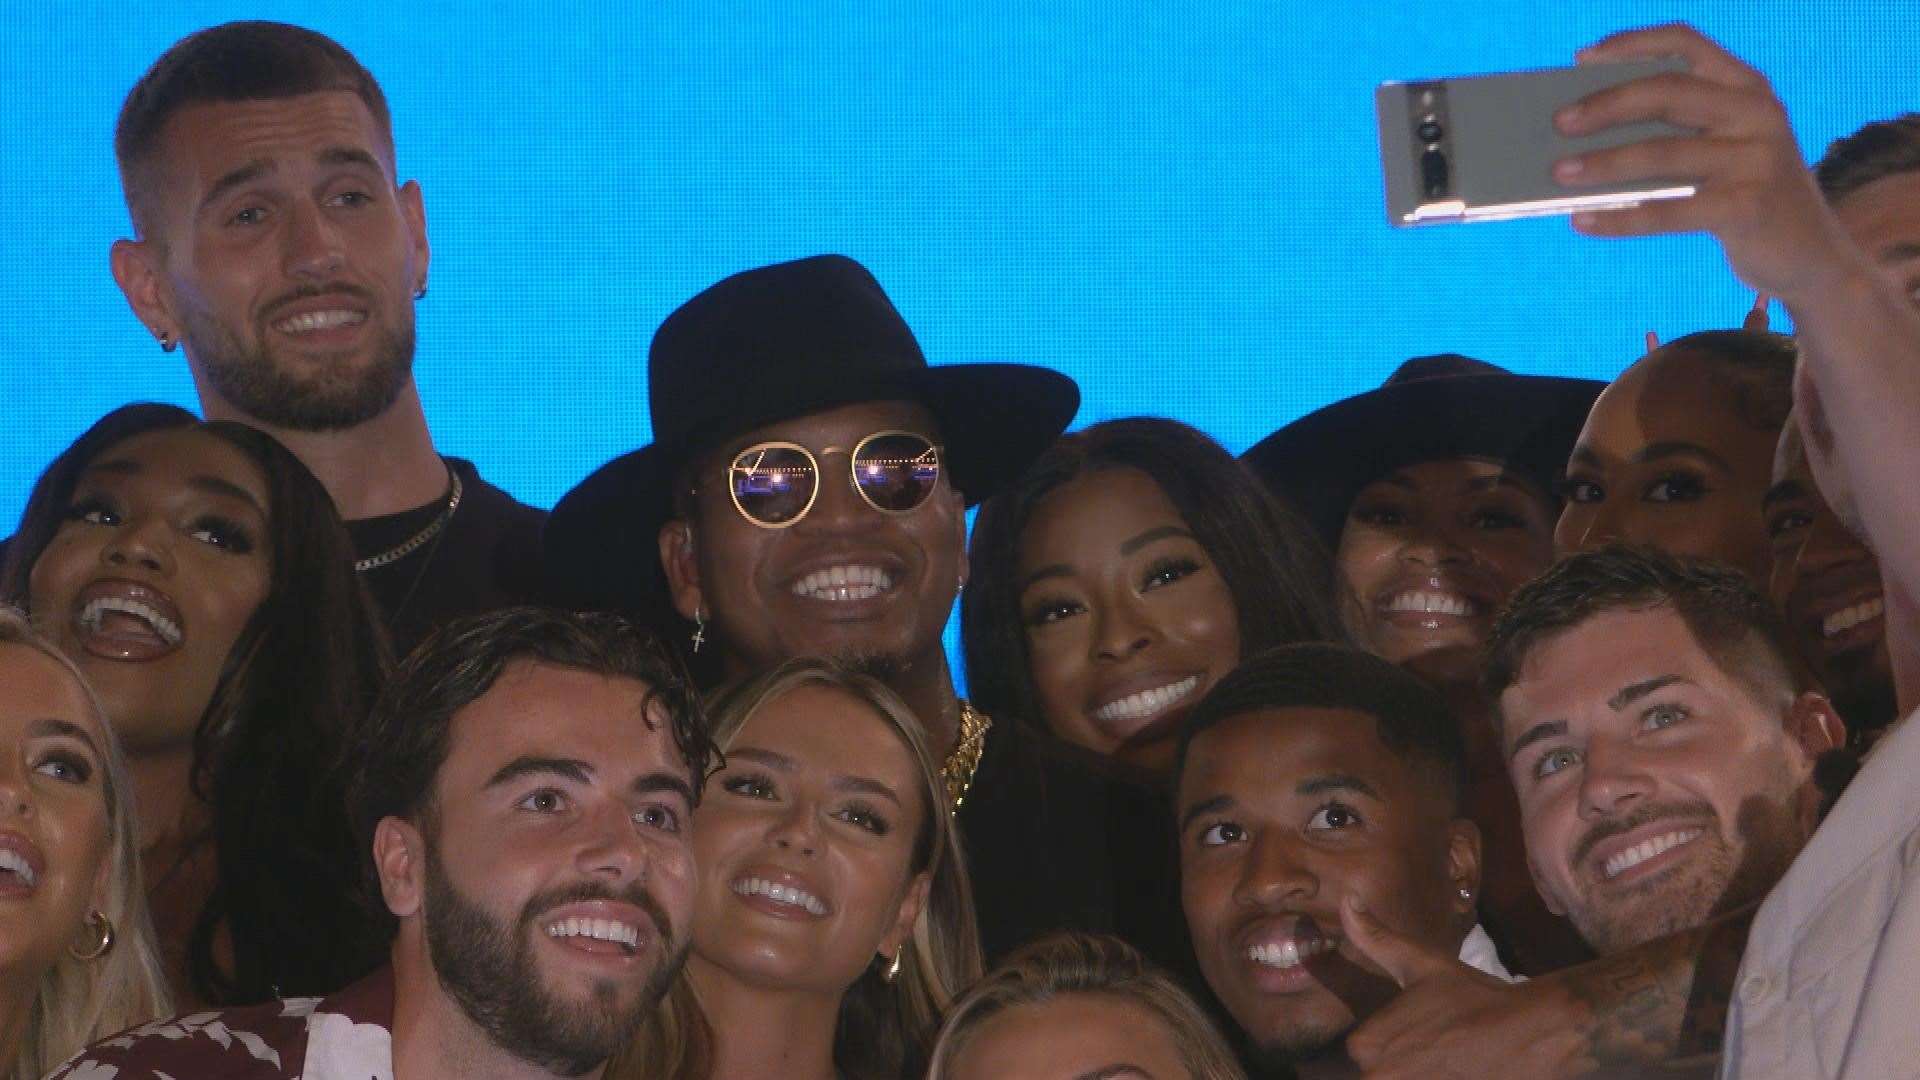 All the islanders gather for a selfie with Ne-Yo. Picture: ITV